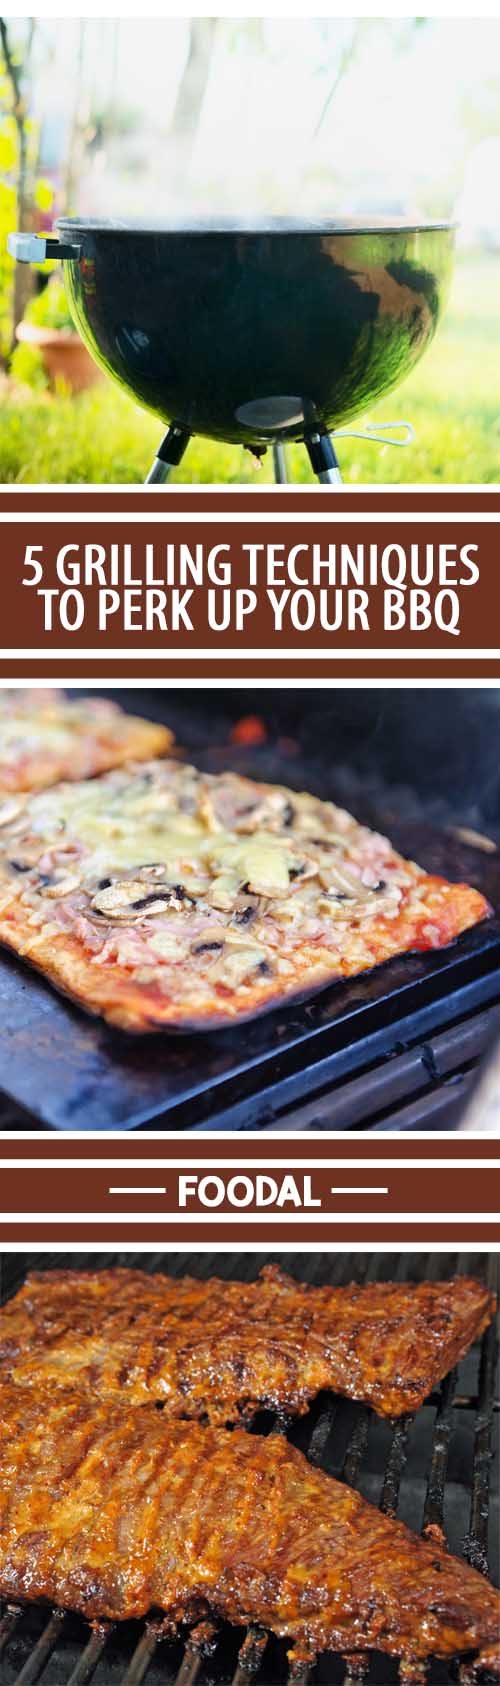 Want to learn a few basics to spruce up your barbecuing endeavors? Learn the basics of smoking, planking, marinating, and pizza on the grill. Check out these great ideas and get grilling now. https://foodal.com/kitchen/outdoor-appliances/barbeque-grills/techniques